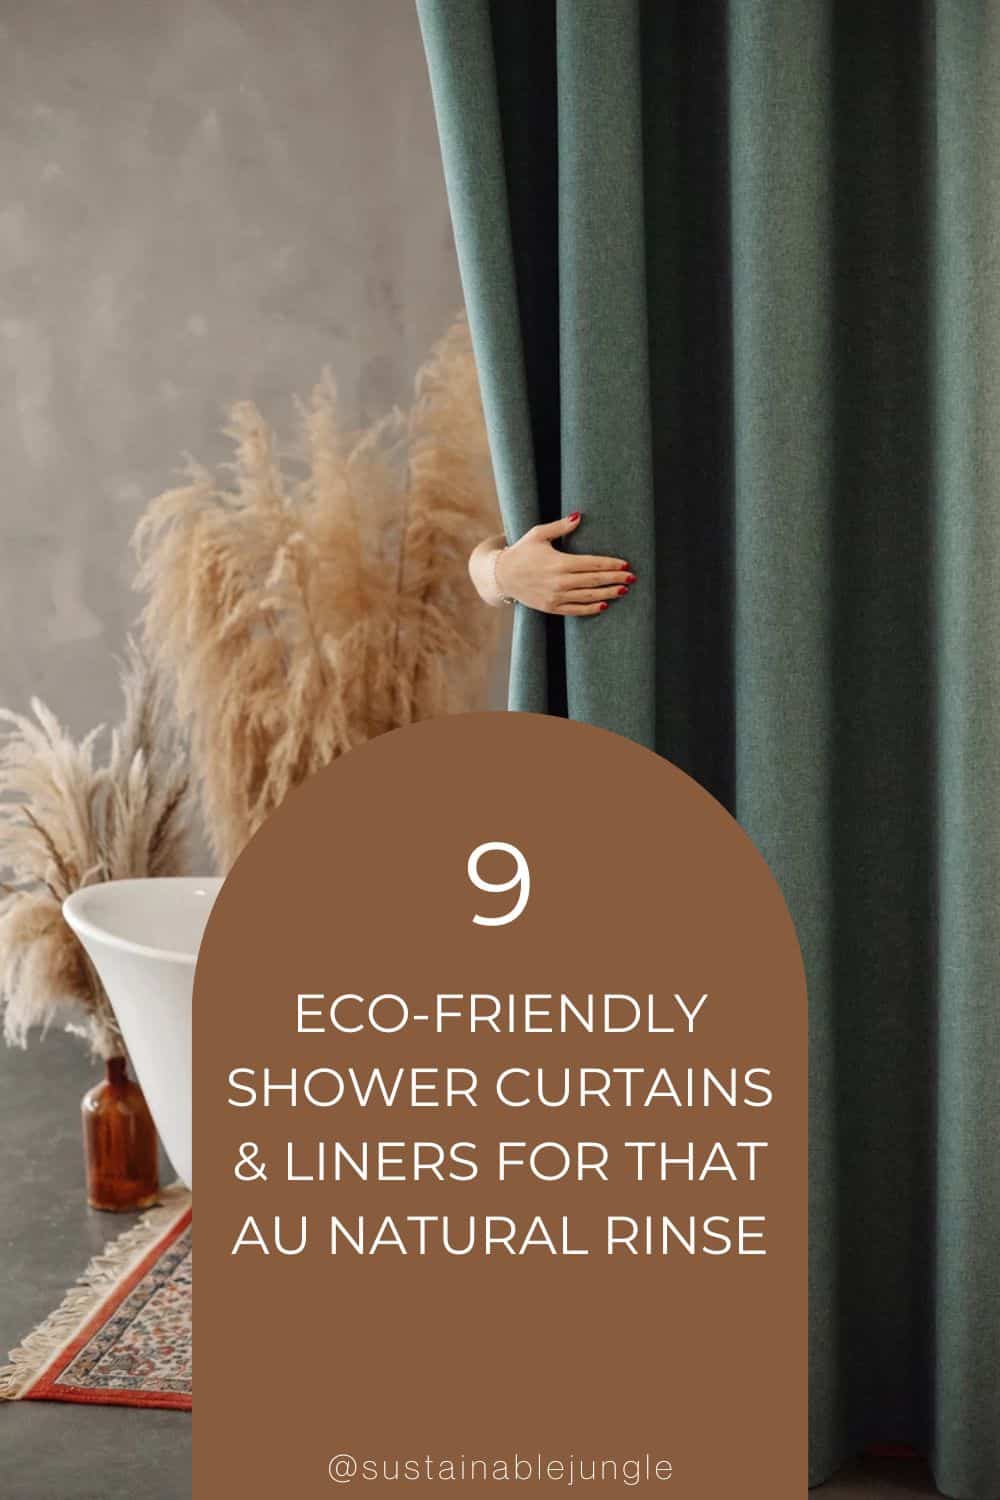 9 Eco-Friendly Shower Curtains & Liners For That Au Natural Rinse Image by Dusty Linen #ecofriendlyshowercurtains #ecofriendlyshowercurtainliners #bestecofriendlyshowercurtain #naturalshowercurtains #naturalshowercurtainliners #naturalfibreshowercurtain #sustainablejungle